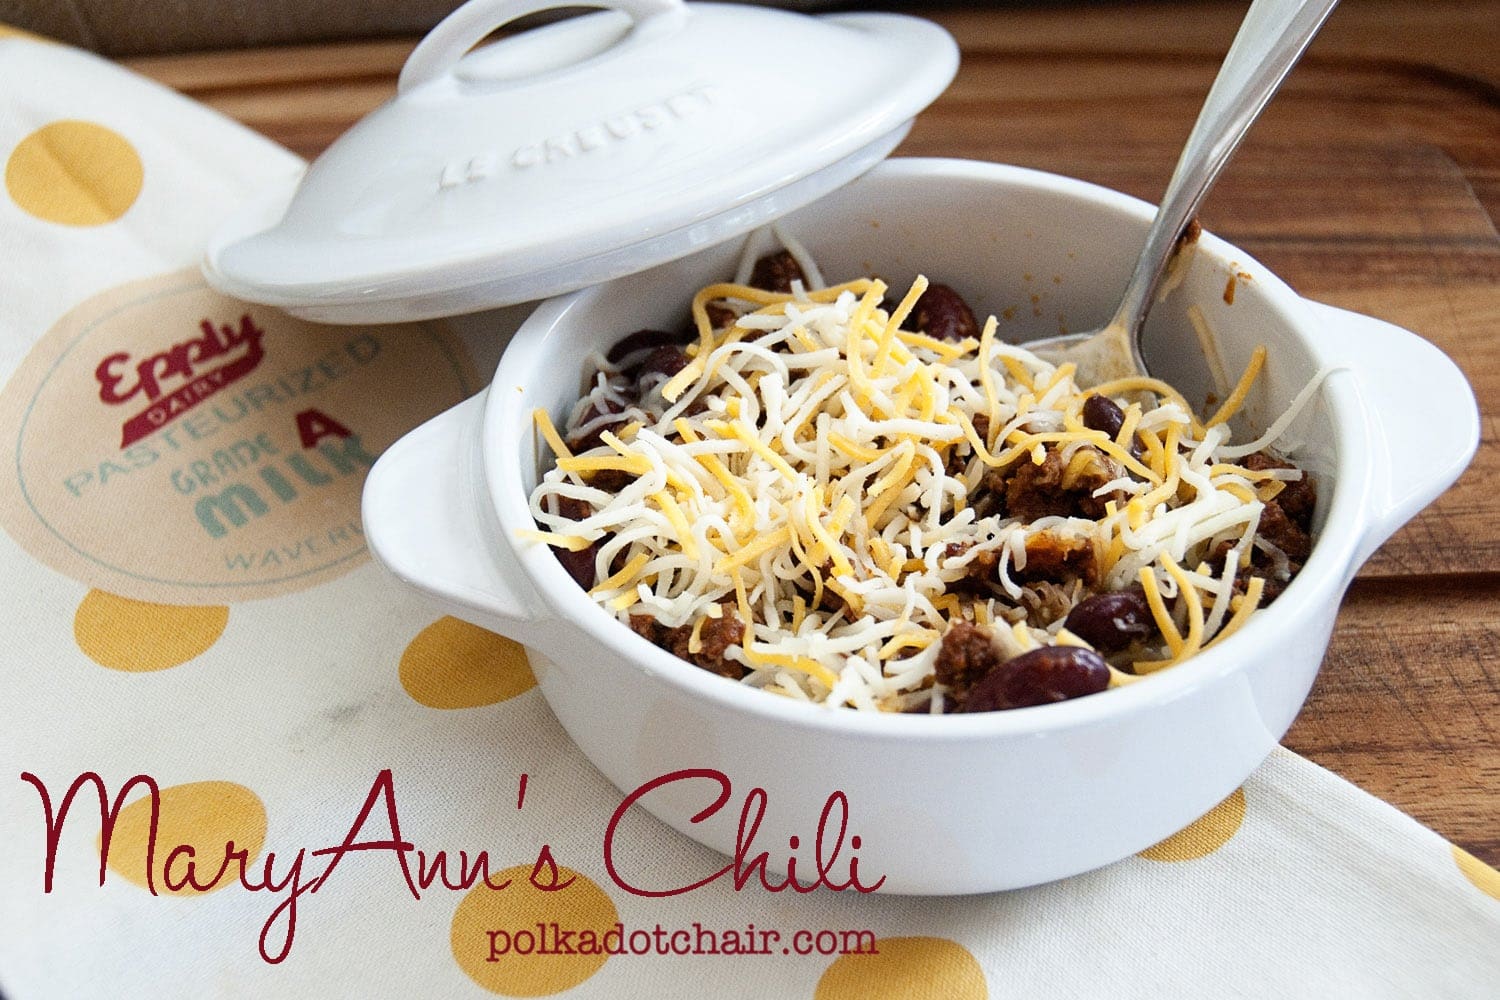 Mary Ann’s Slow Cook Chili Recipe